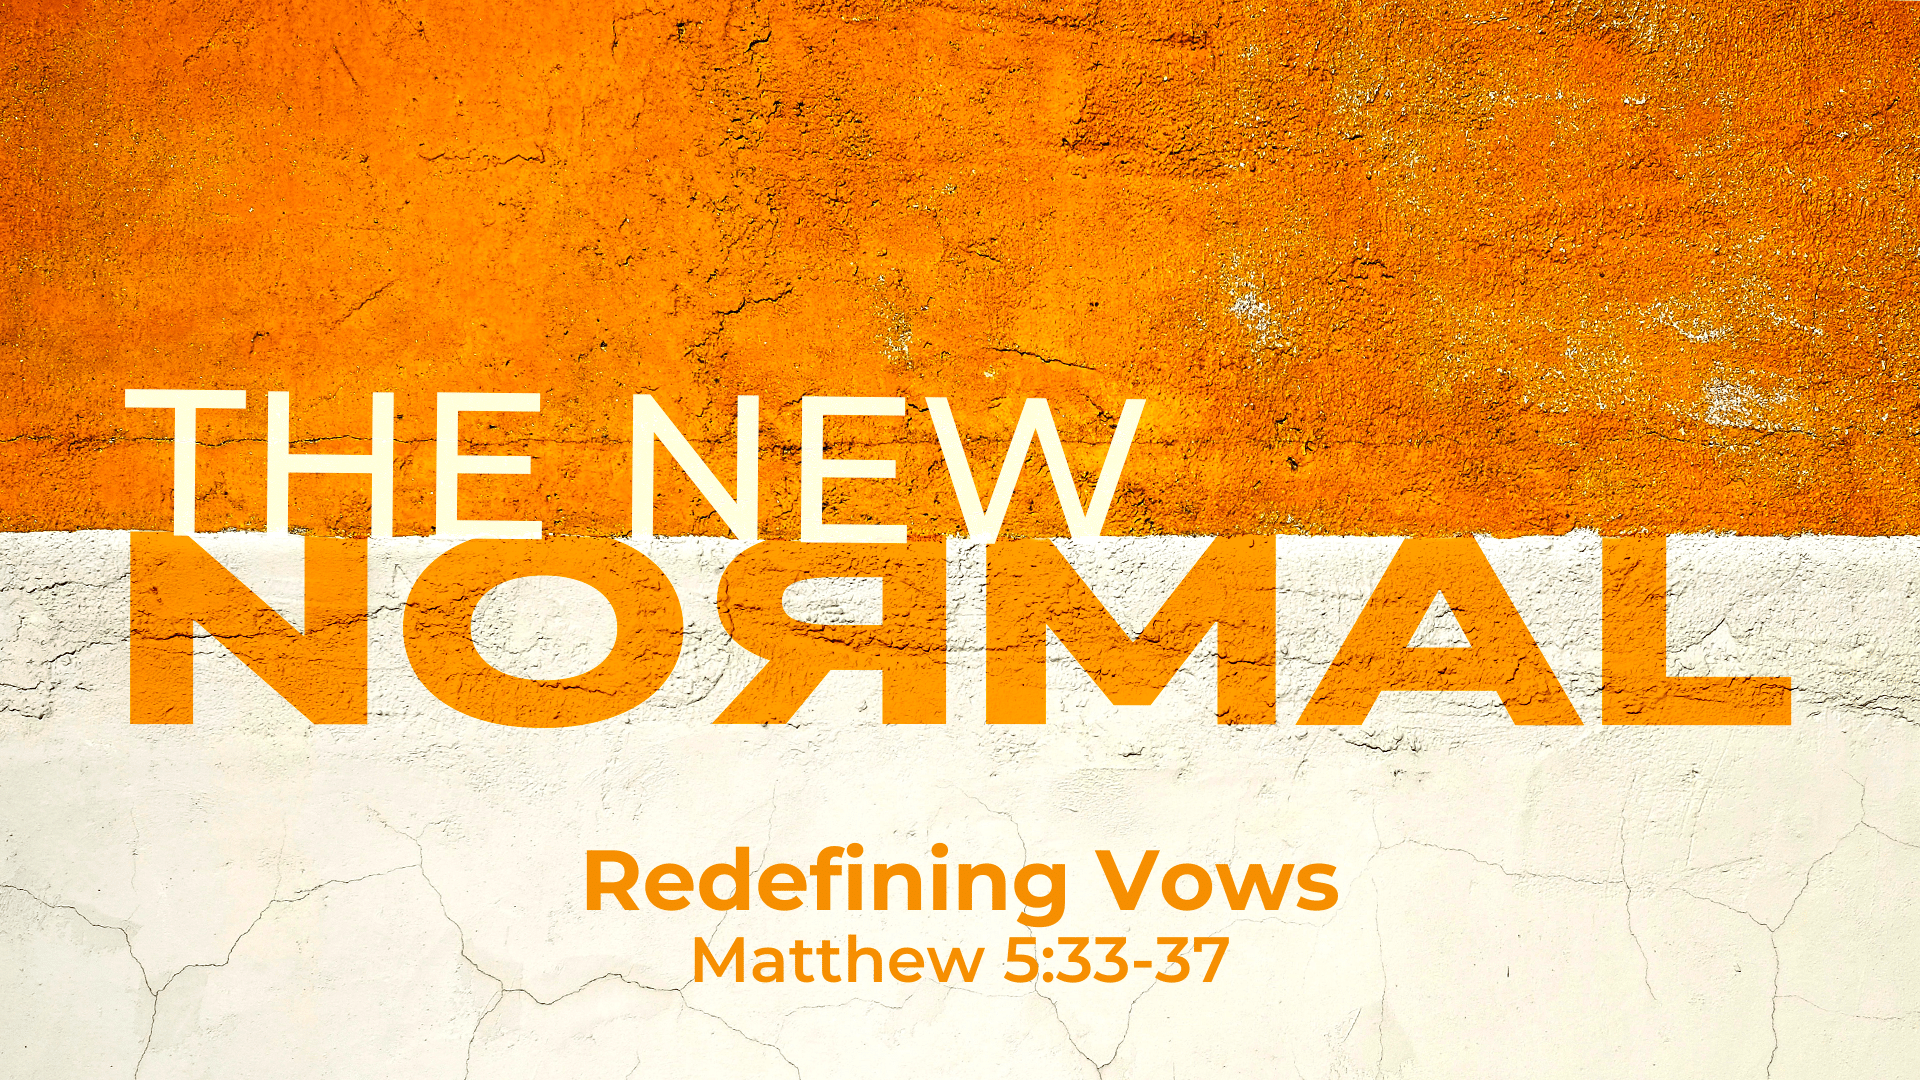 The New Normal: Redefining Vows